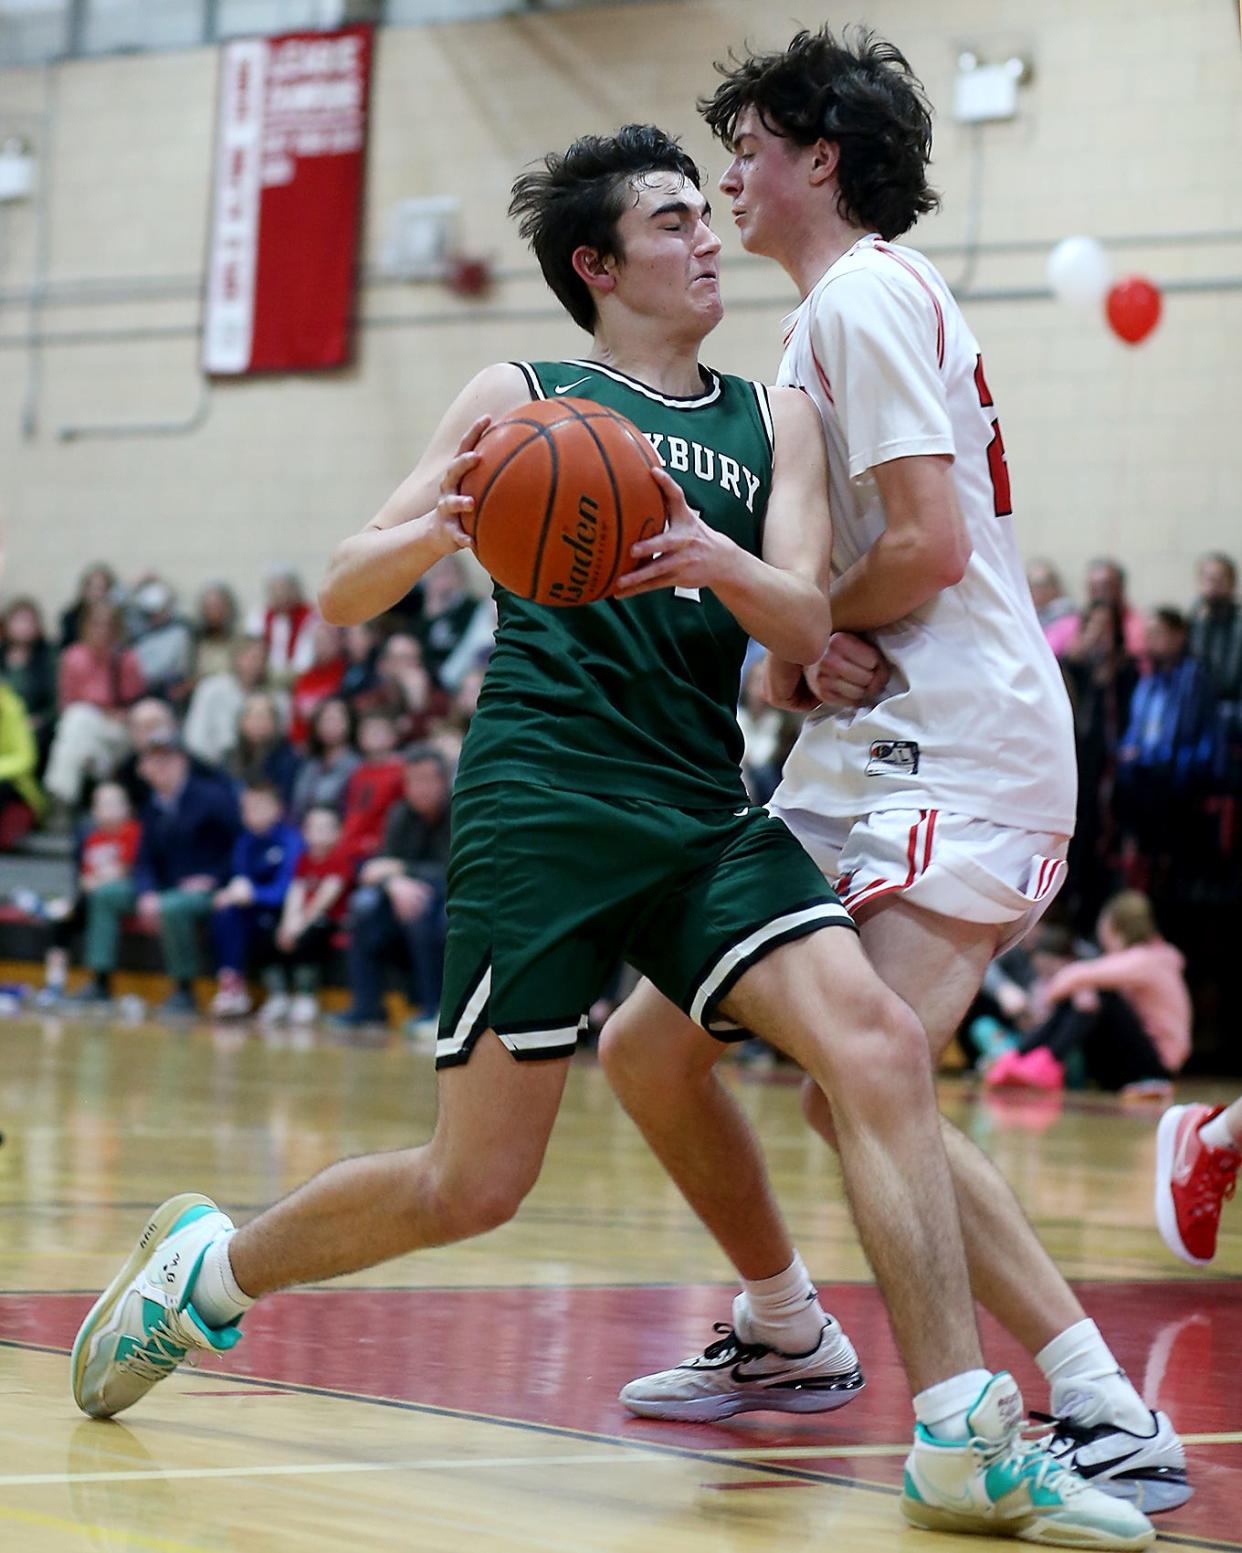 Duxbury's Liam Burns earns a trip to the line after a foul by Hingham’s Charlie Matthews during fourth quarter action of their game against Hingham at Hingham High on Friday, Feb. 10, 2023. 